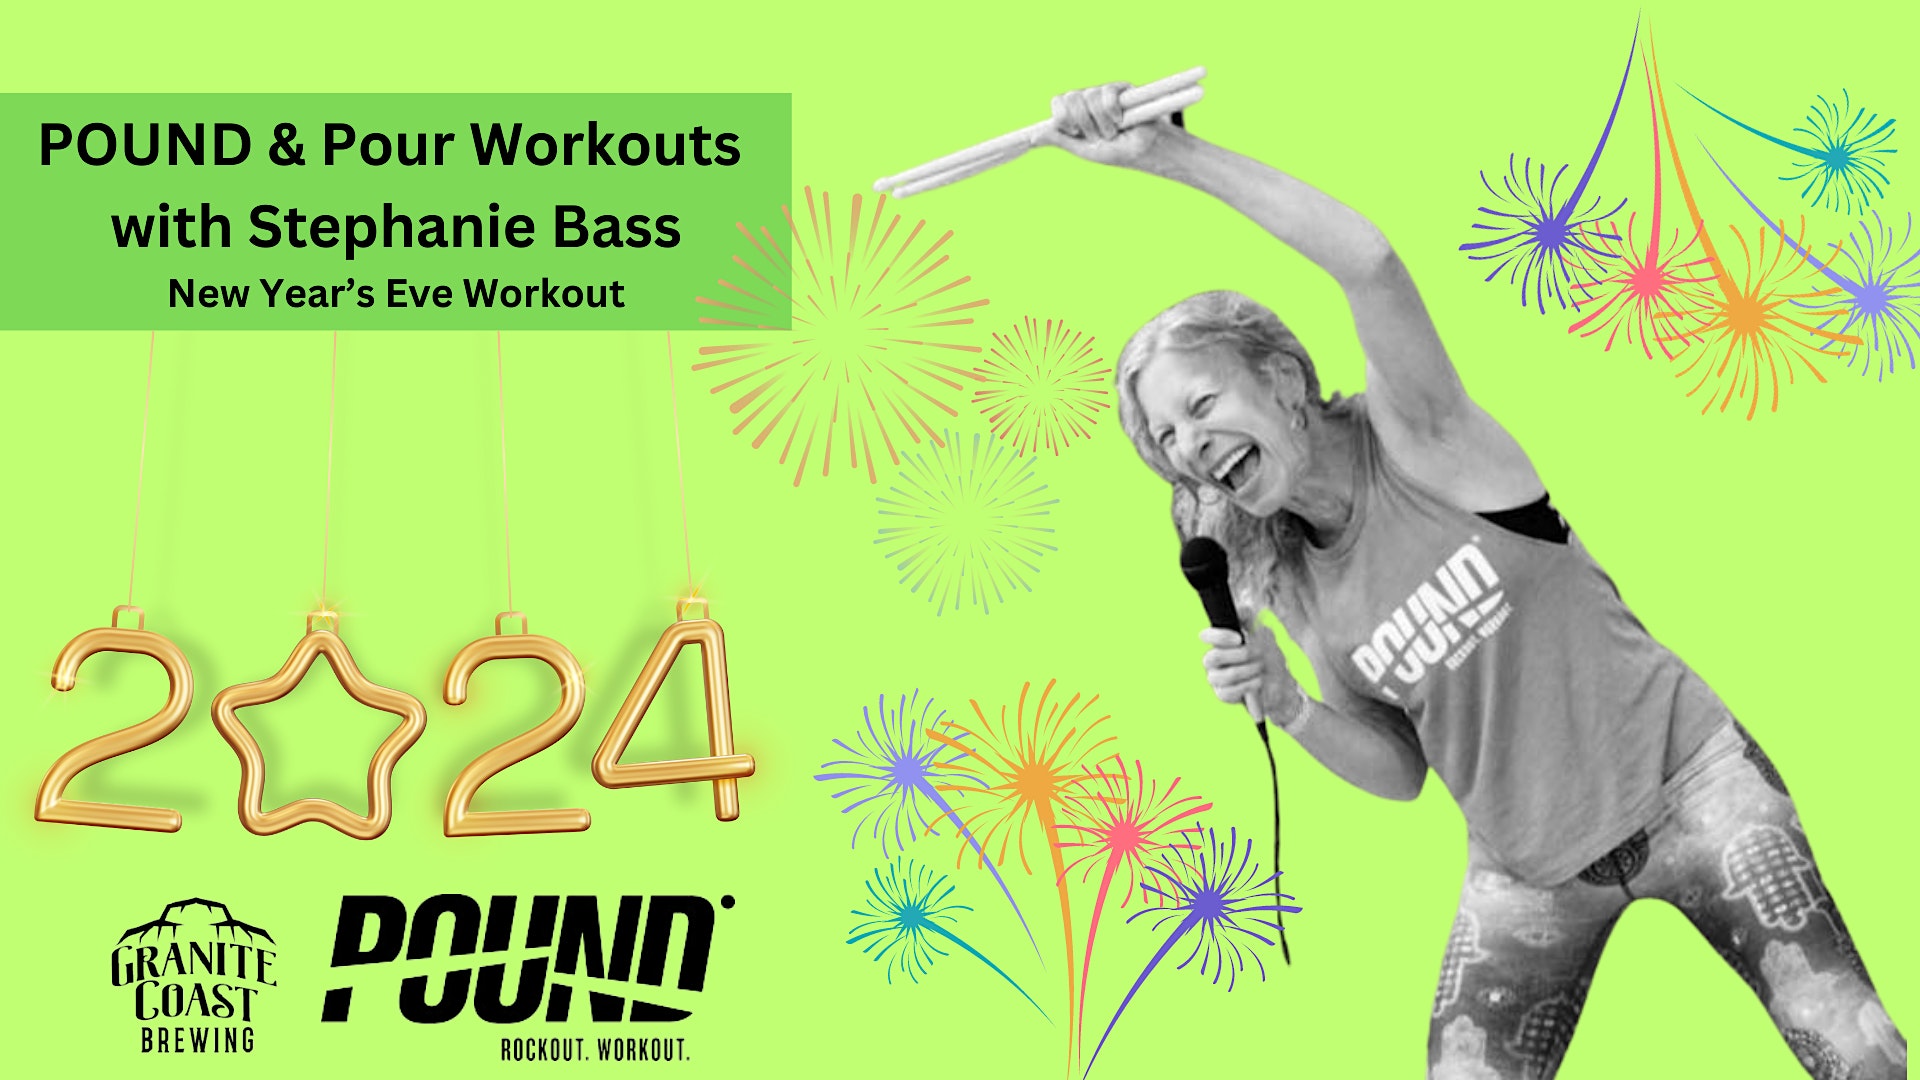 Experience dynamic exercise sessions with Stephanie Bass through Pound & Four workouts.